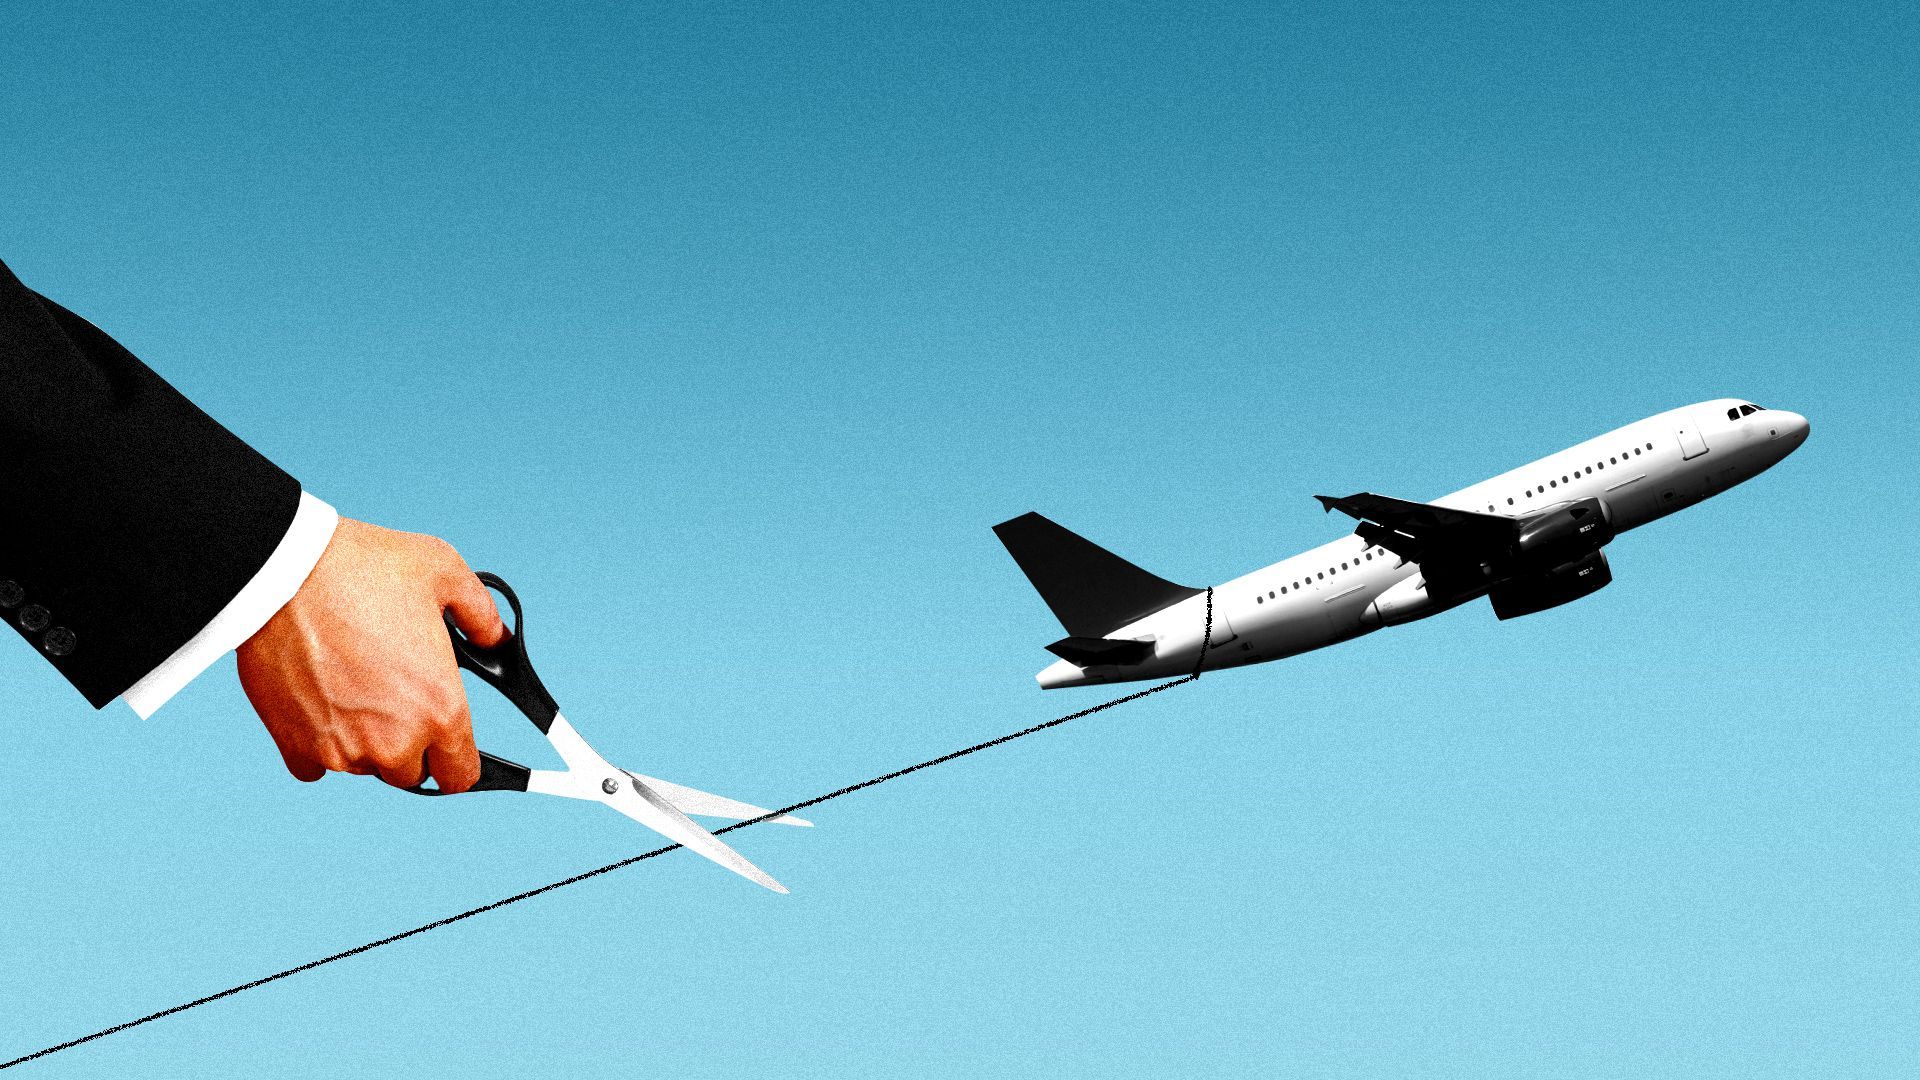 Illustration of an airplane in the air, being held back by a string that a hand is reaching out to cut with a pair of scissors. 